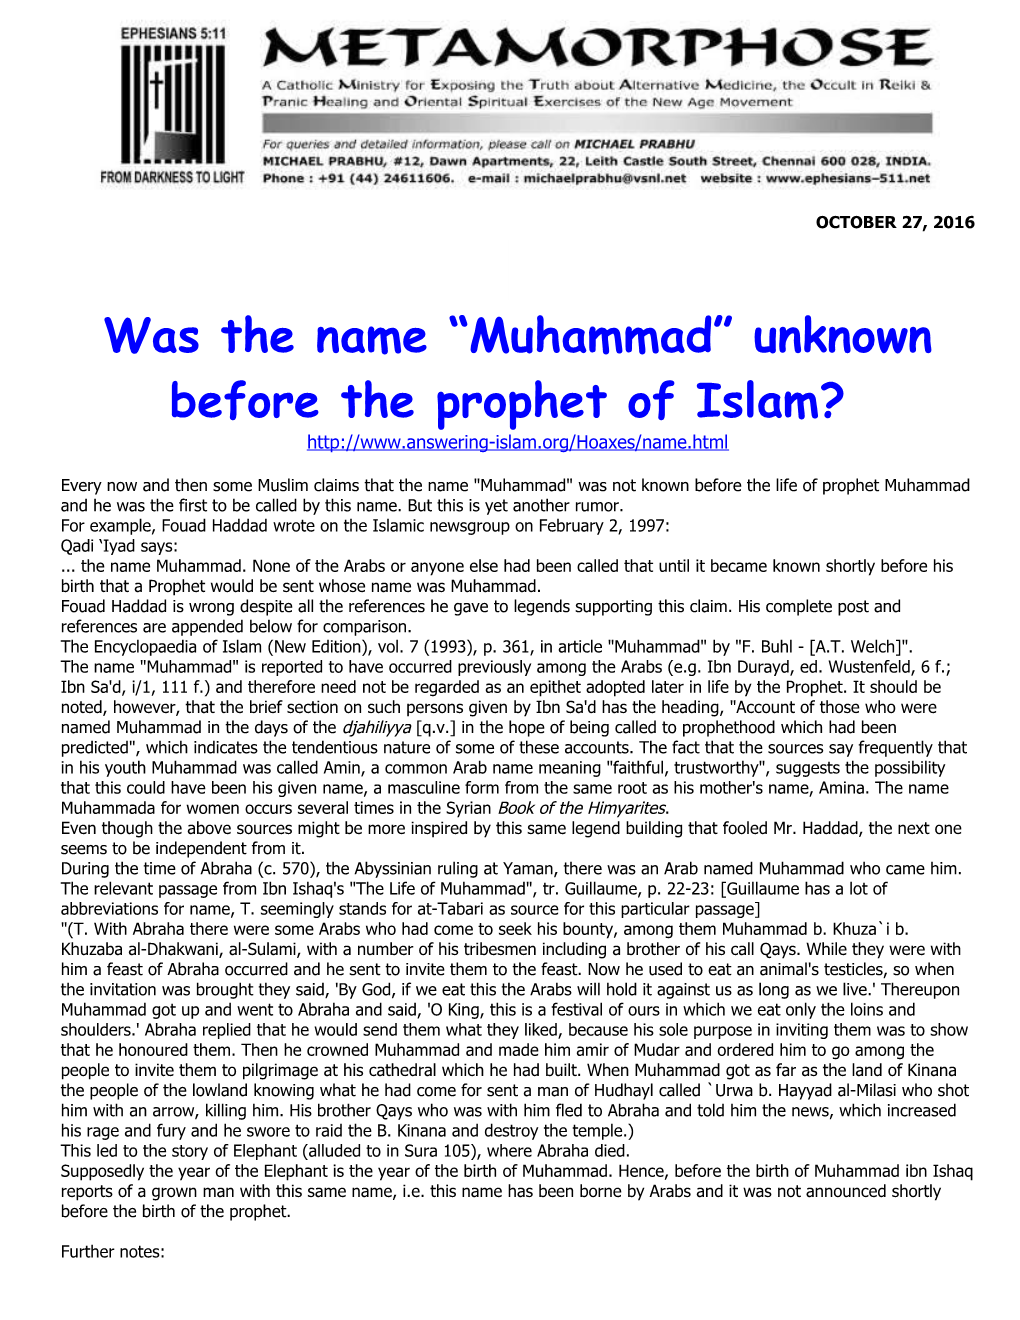 Was the Name Muhammad Unknown Before the Prophet of Islam?